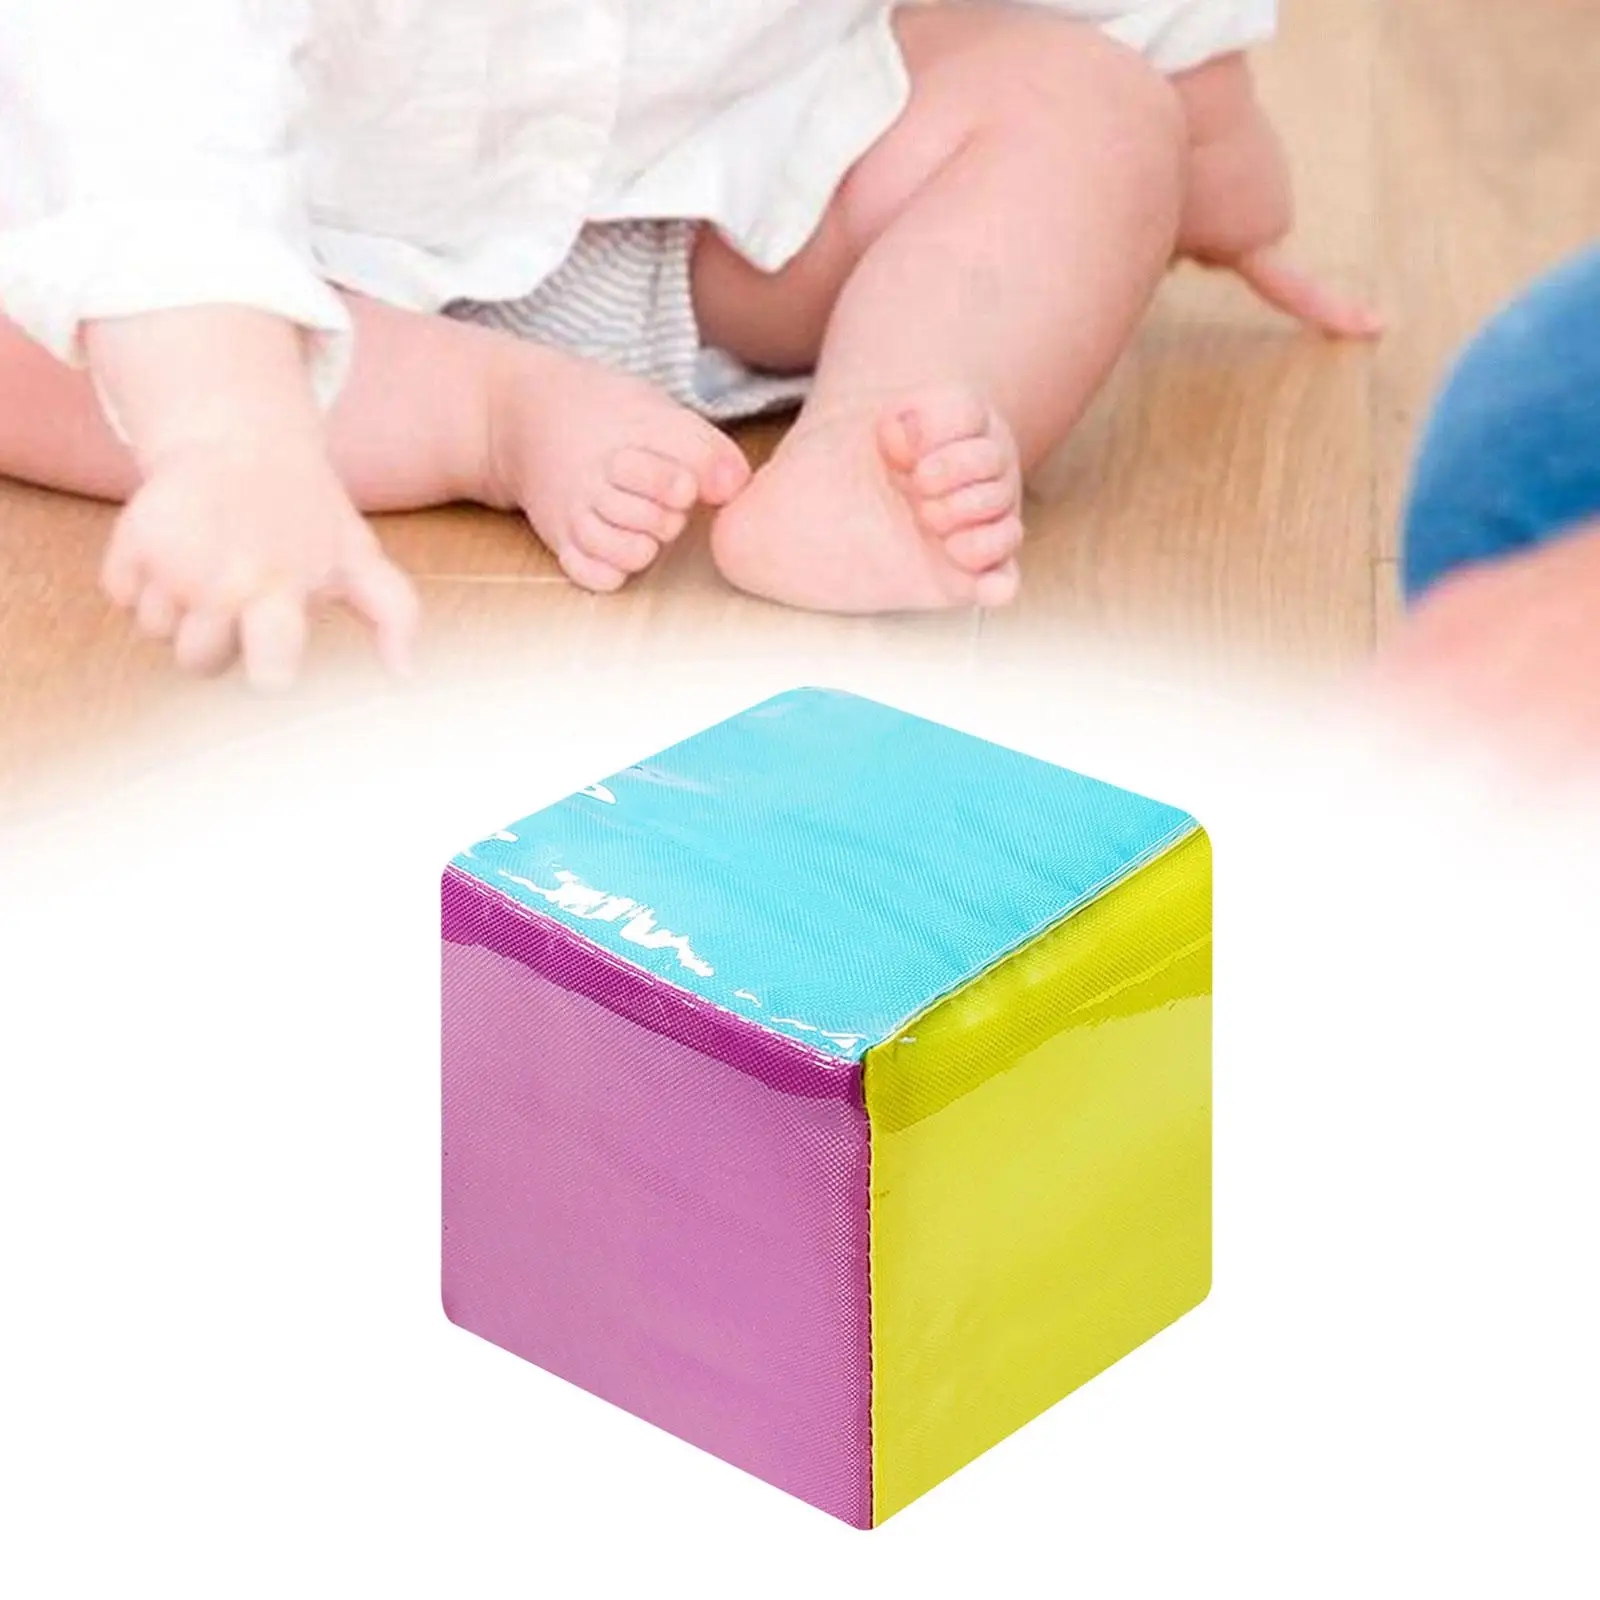 Education Playing Game Dice Toddlers Role Playing Early Education Learning Cubes for Kindergarten Preschool Blocks Toys Teaching